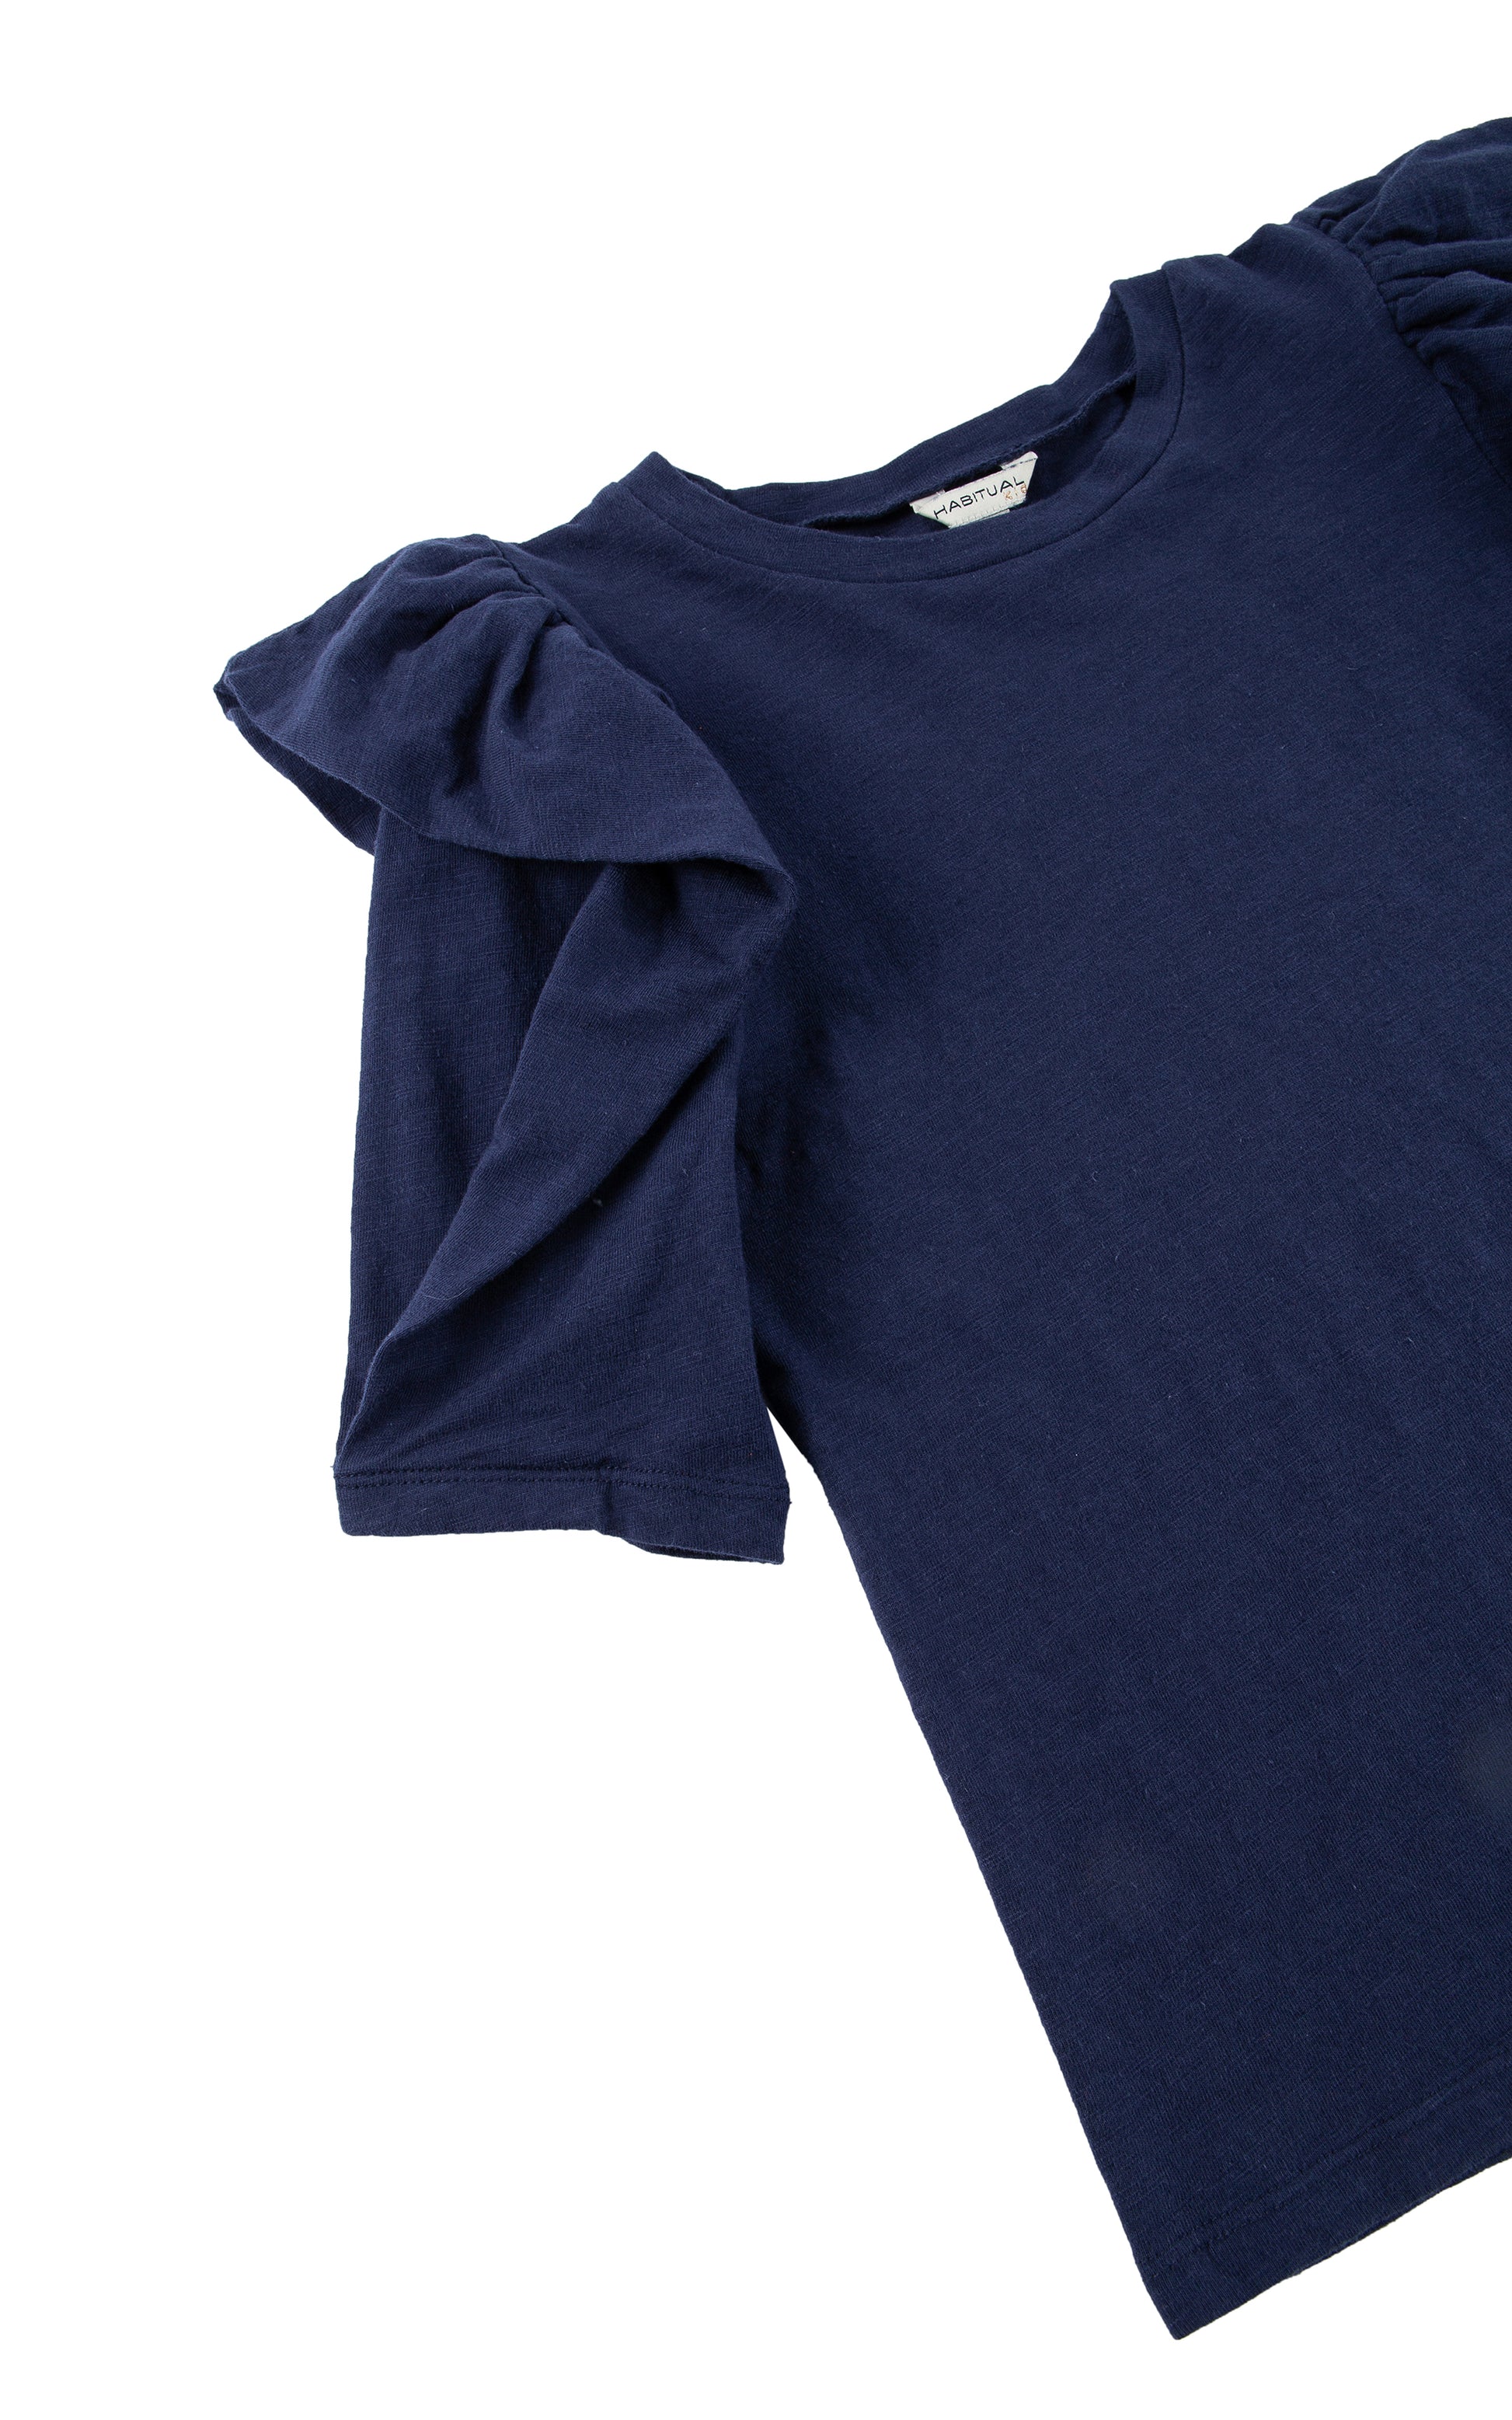 Sleeve View Navy blue Top with Large sleeve ruffle 